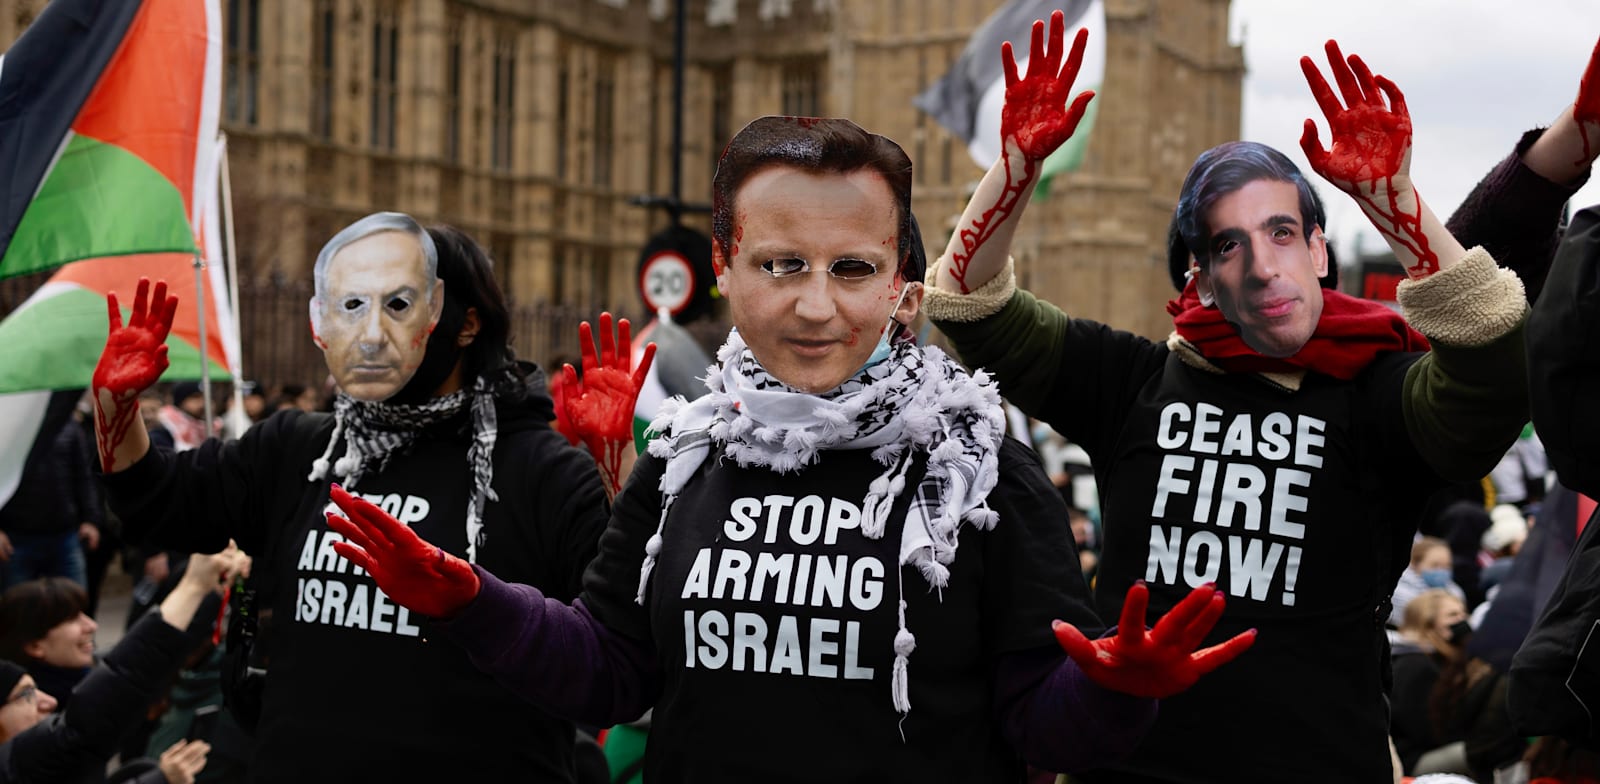 How Britain’s promises clashed with reality, leading to a turning point in their relationship with Israel